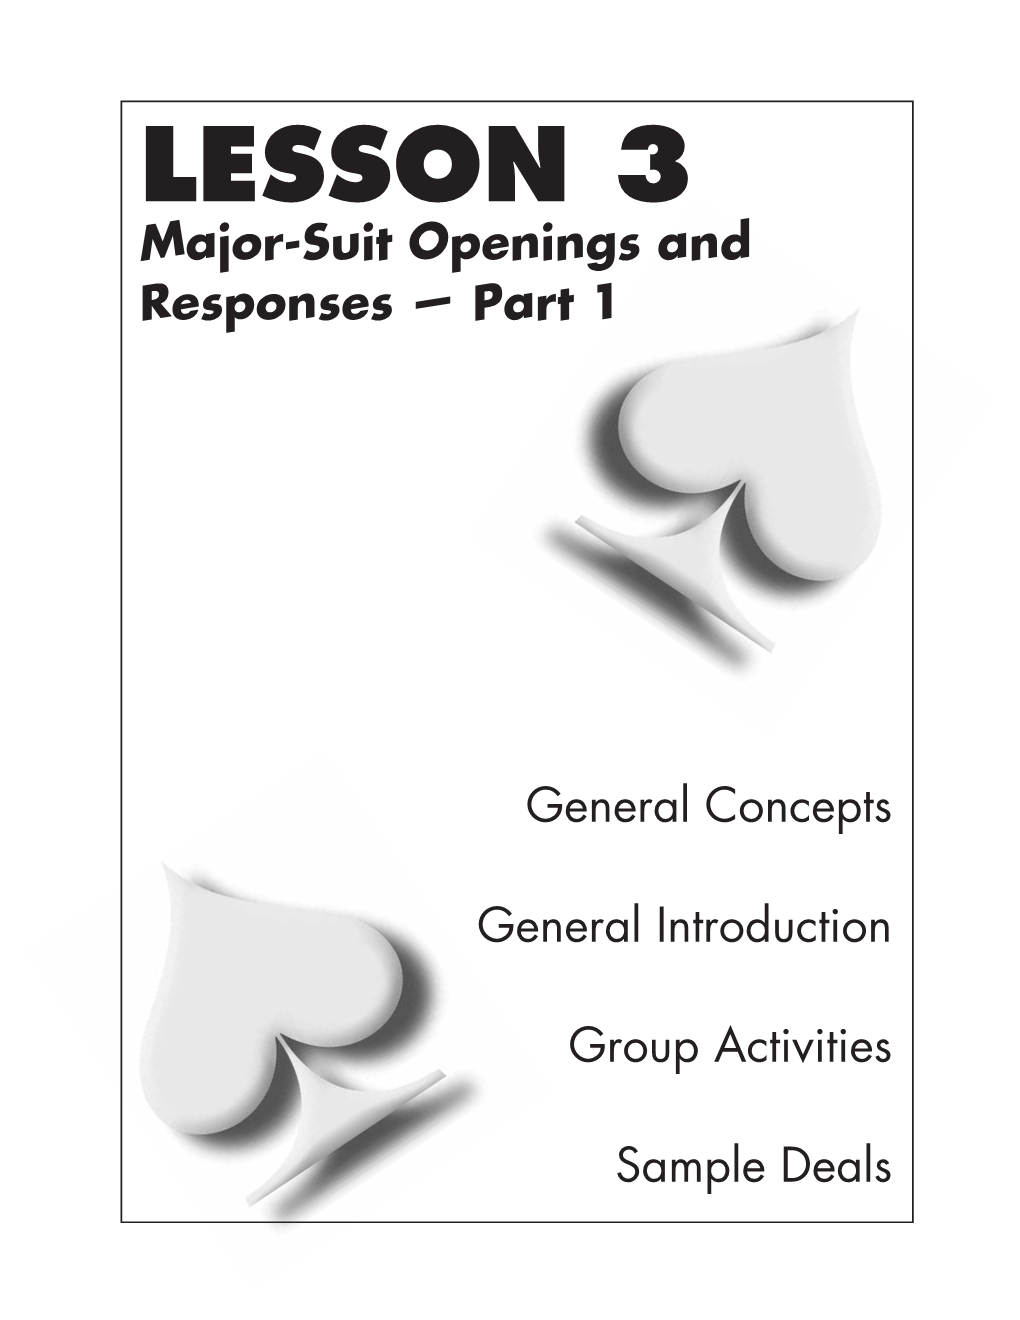 LESSON 3 Major-Suit Openings and Responses — Part 1